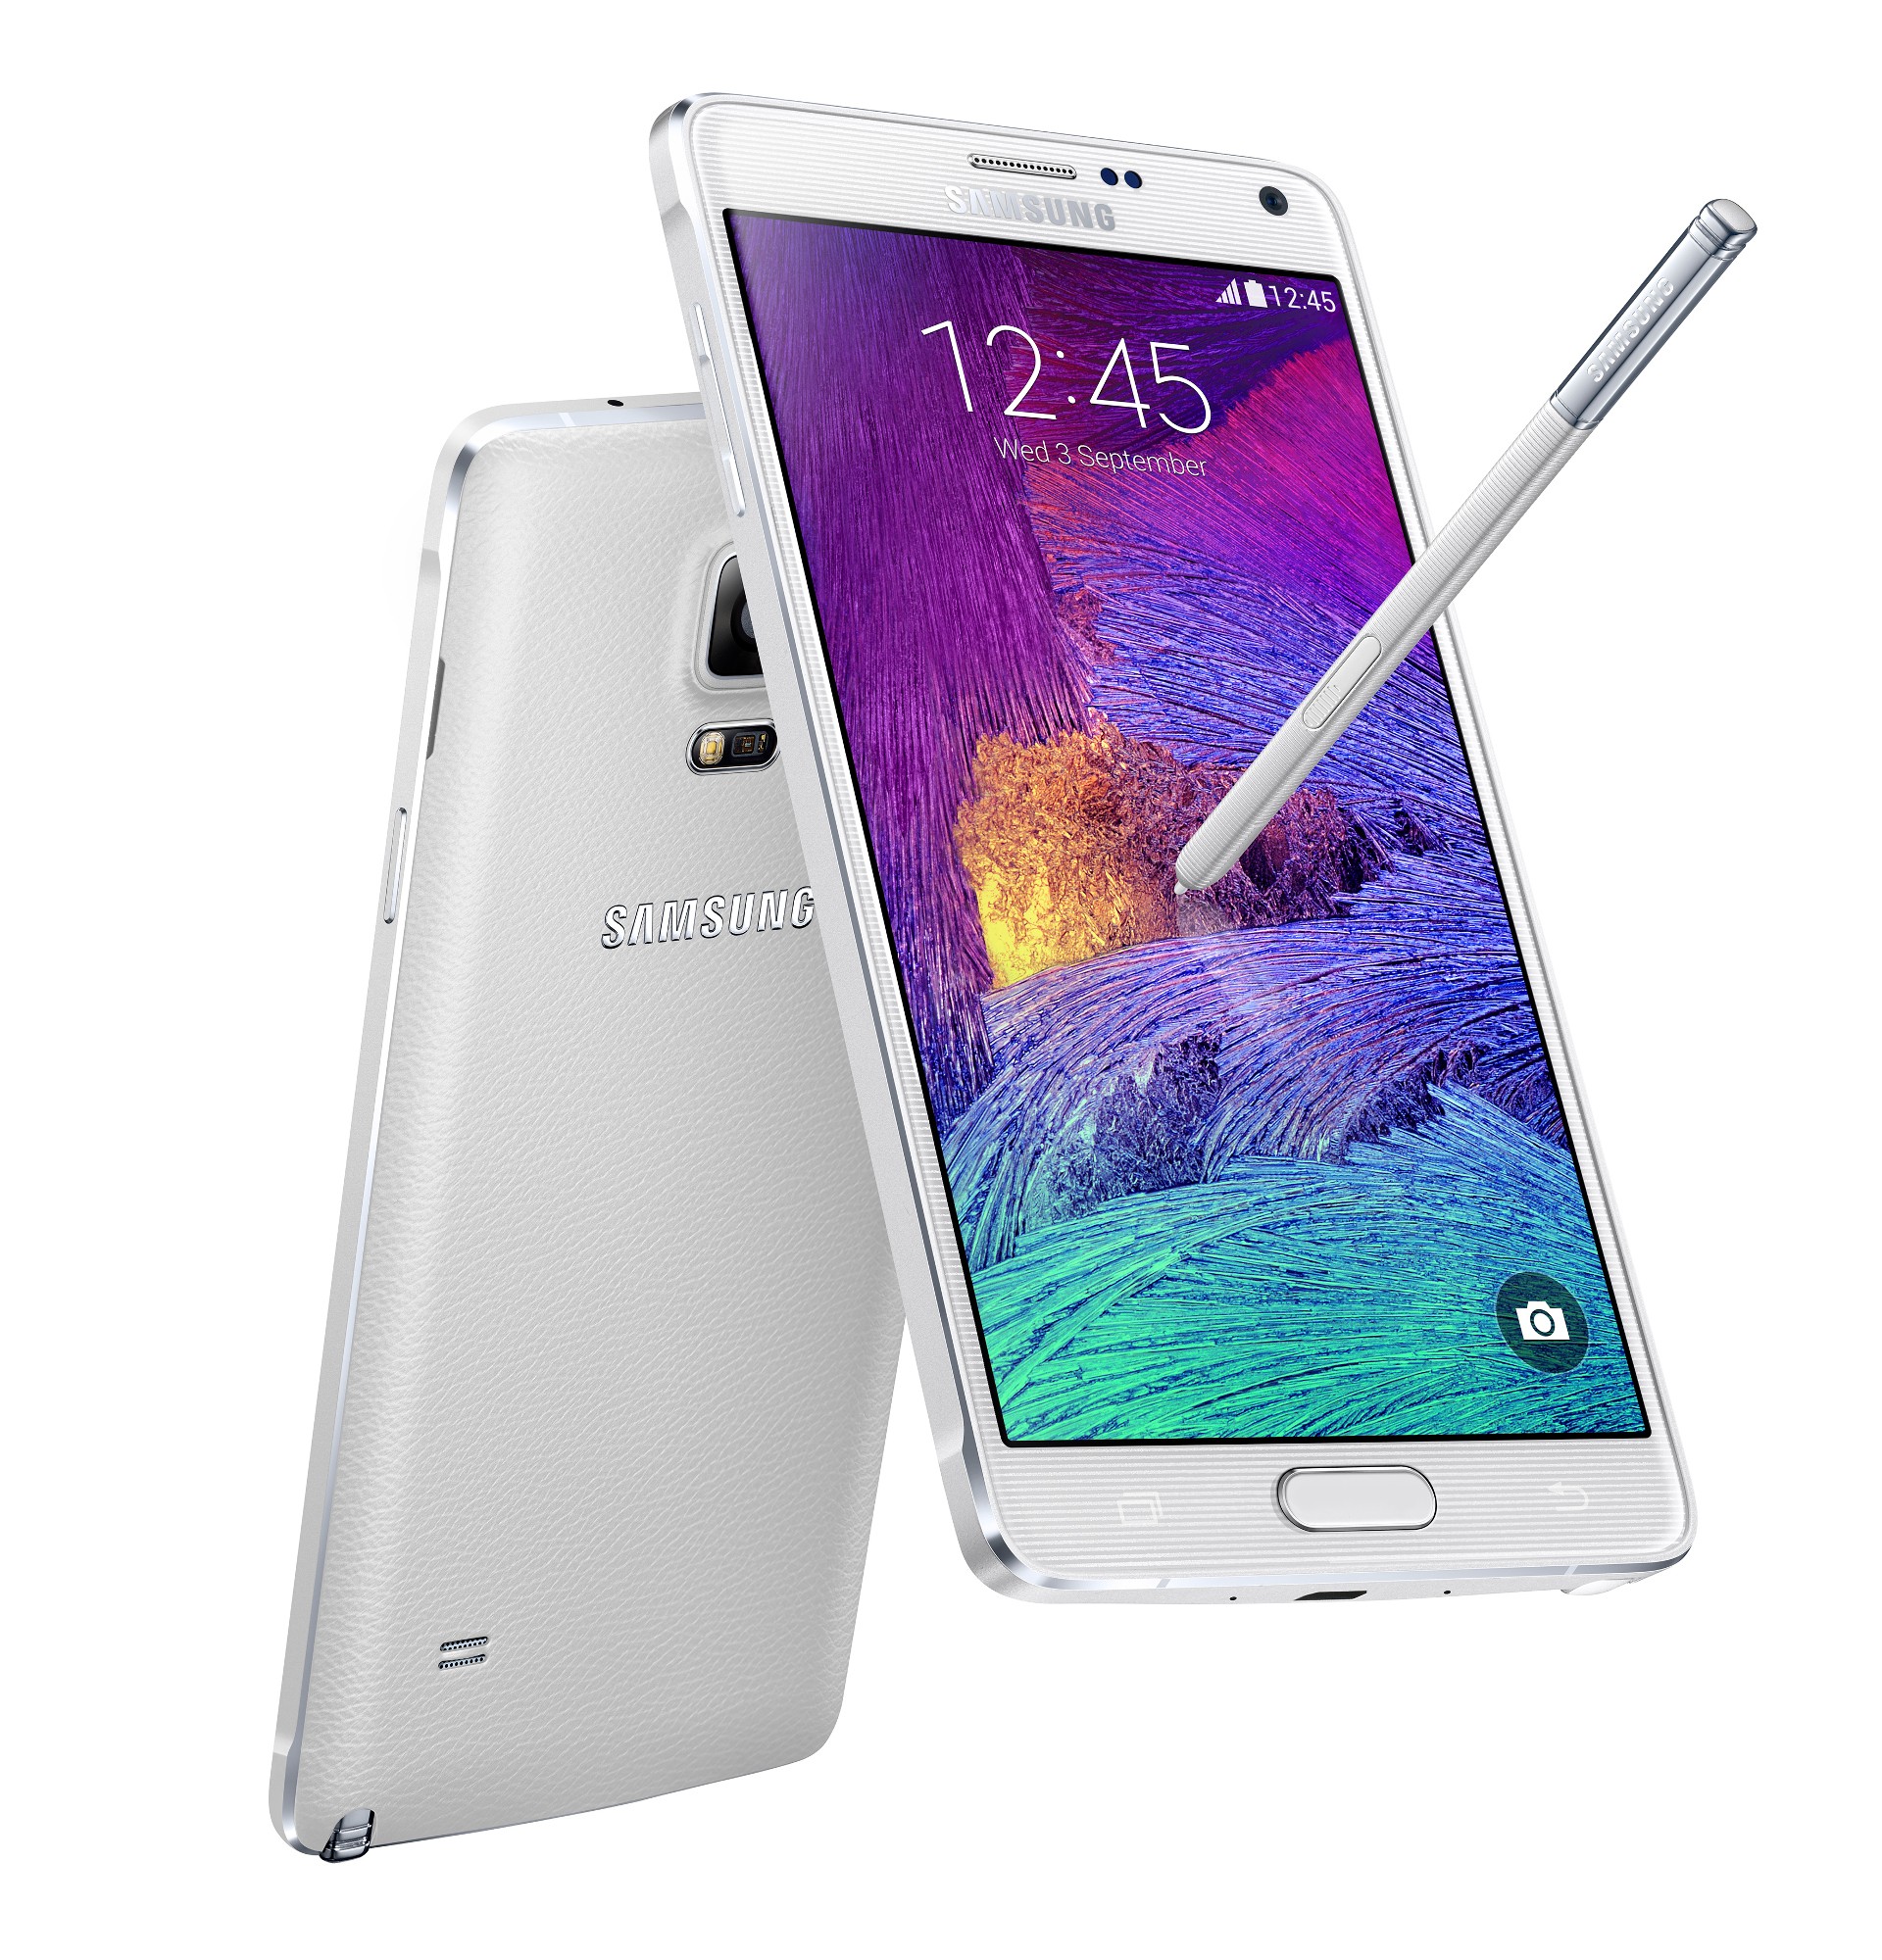 Samsung-Galaxy-Note-4-and-Galaxy-Note-Edge-Unleashed-at-IFA-2014-457525-2